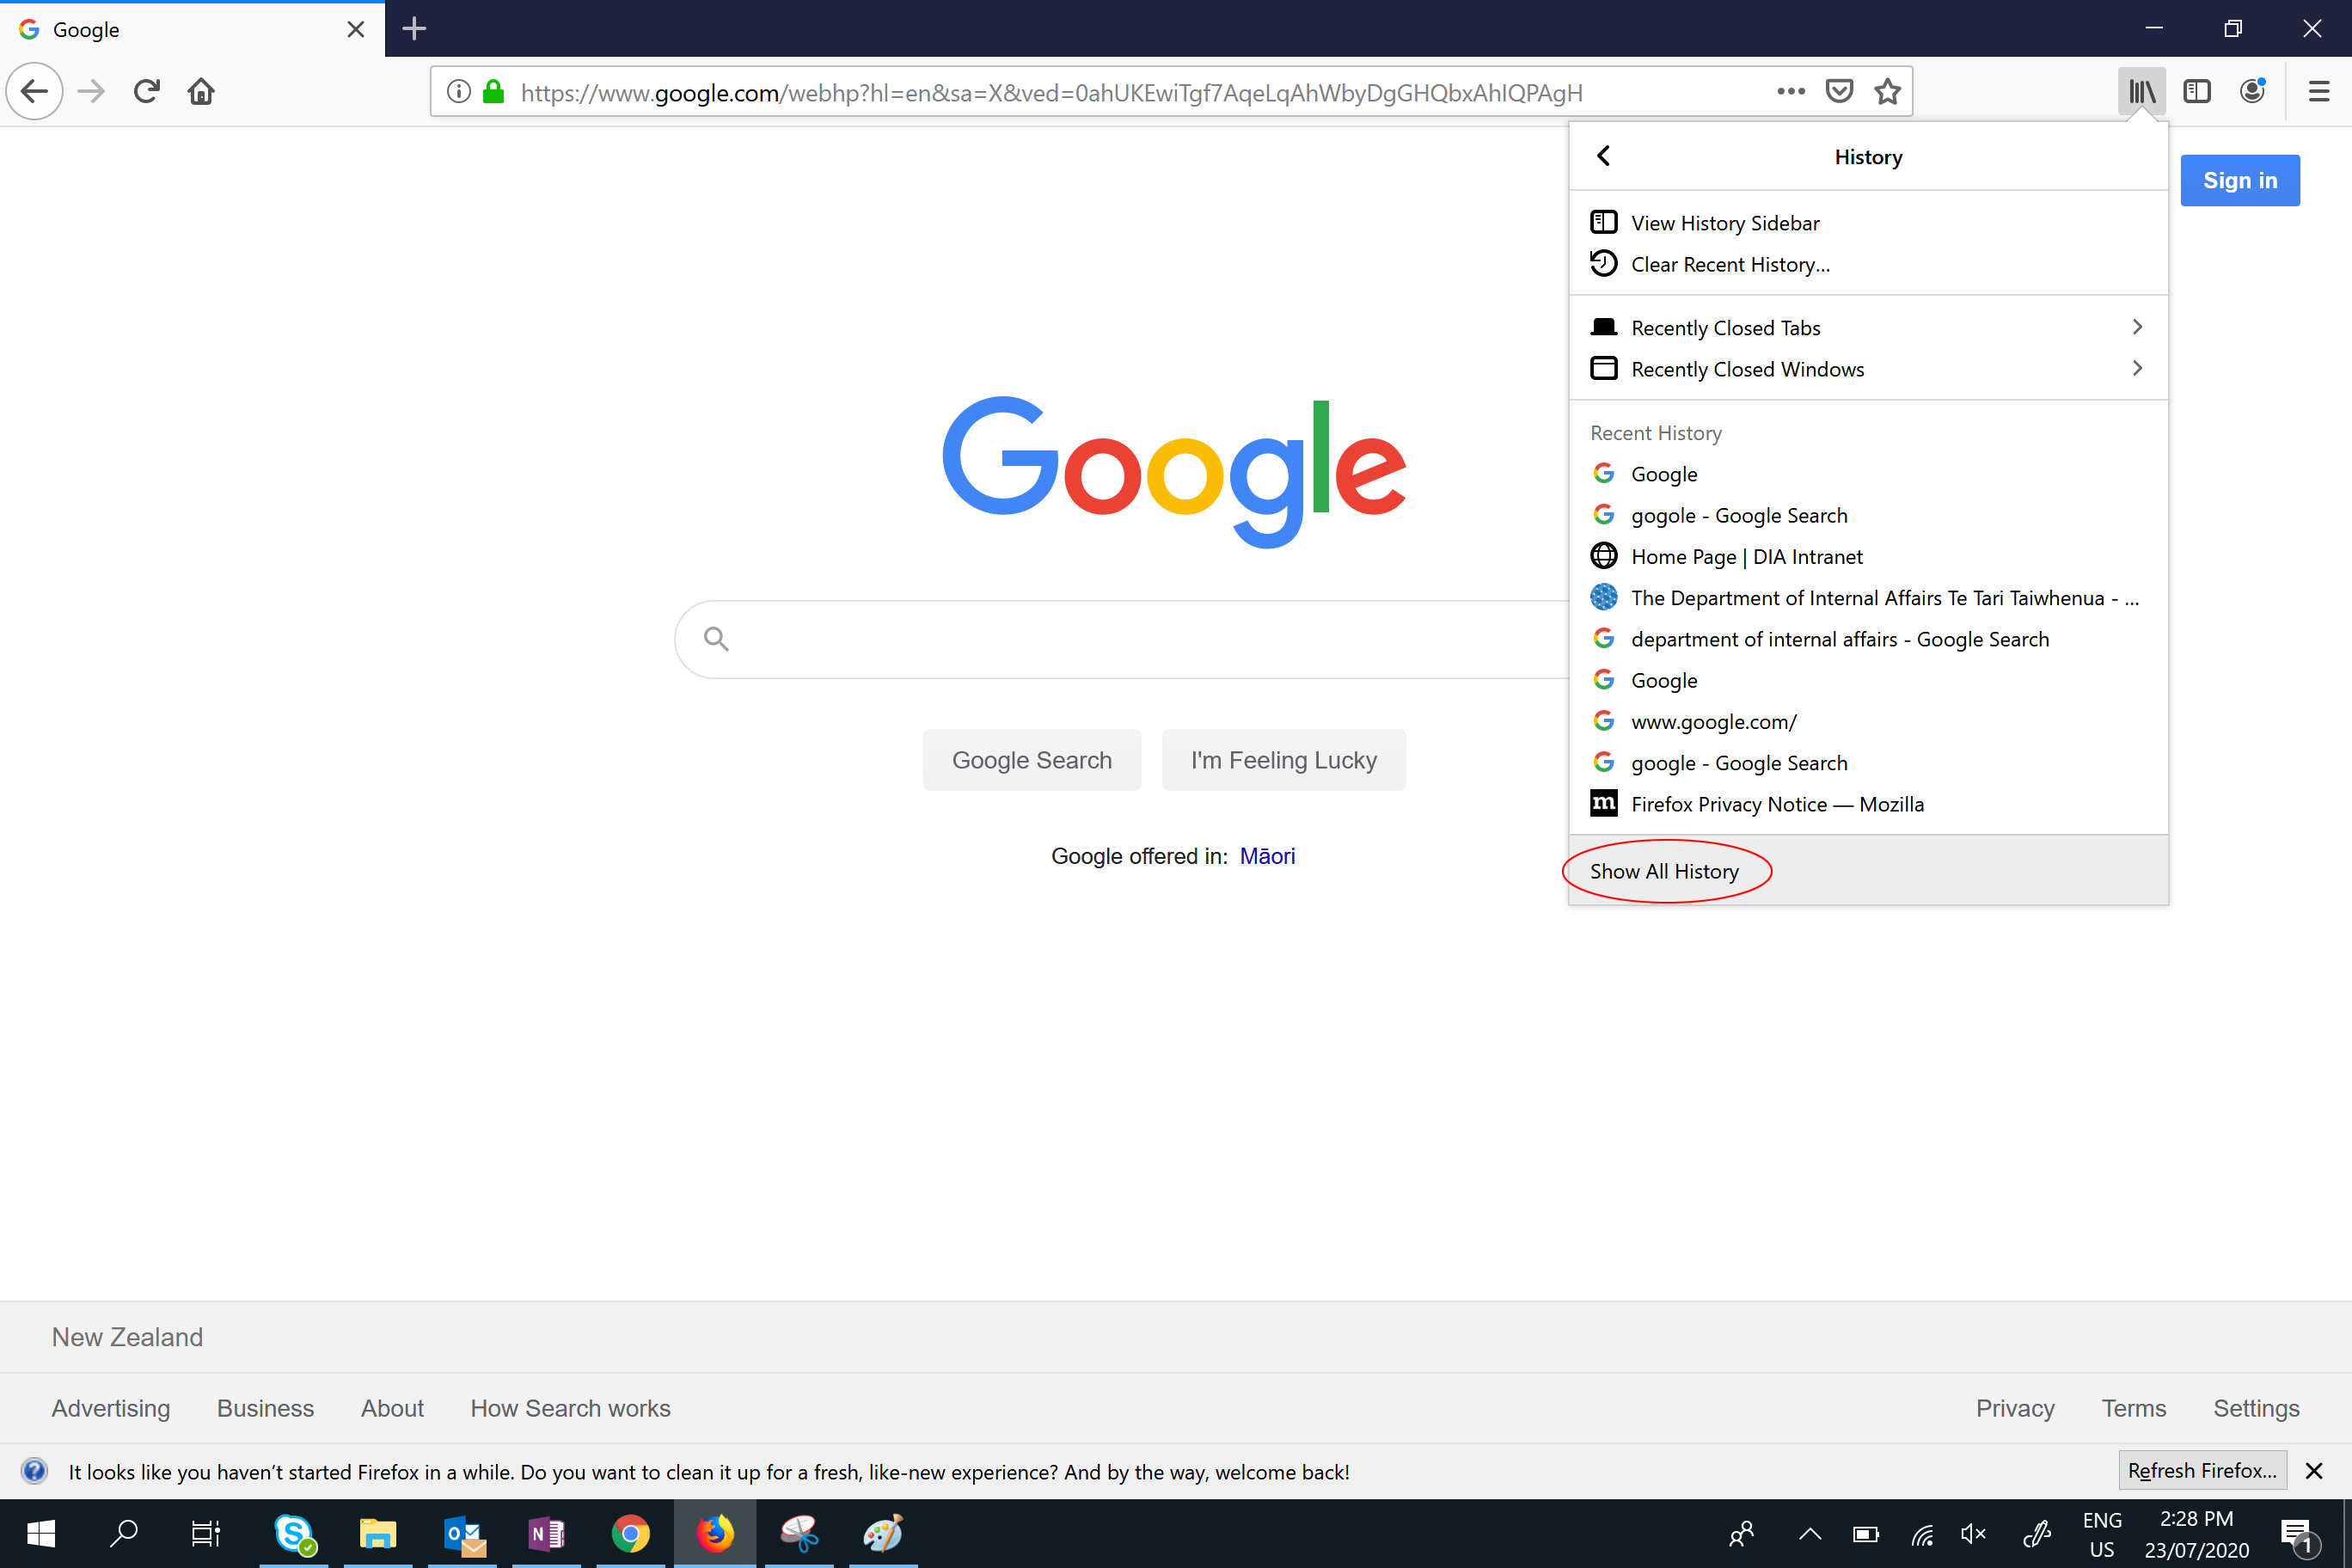 Show all history in firefox